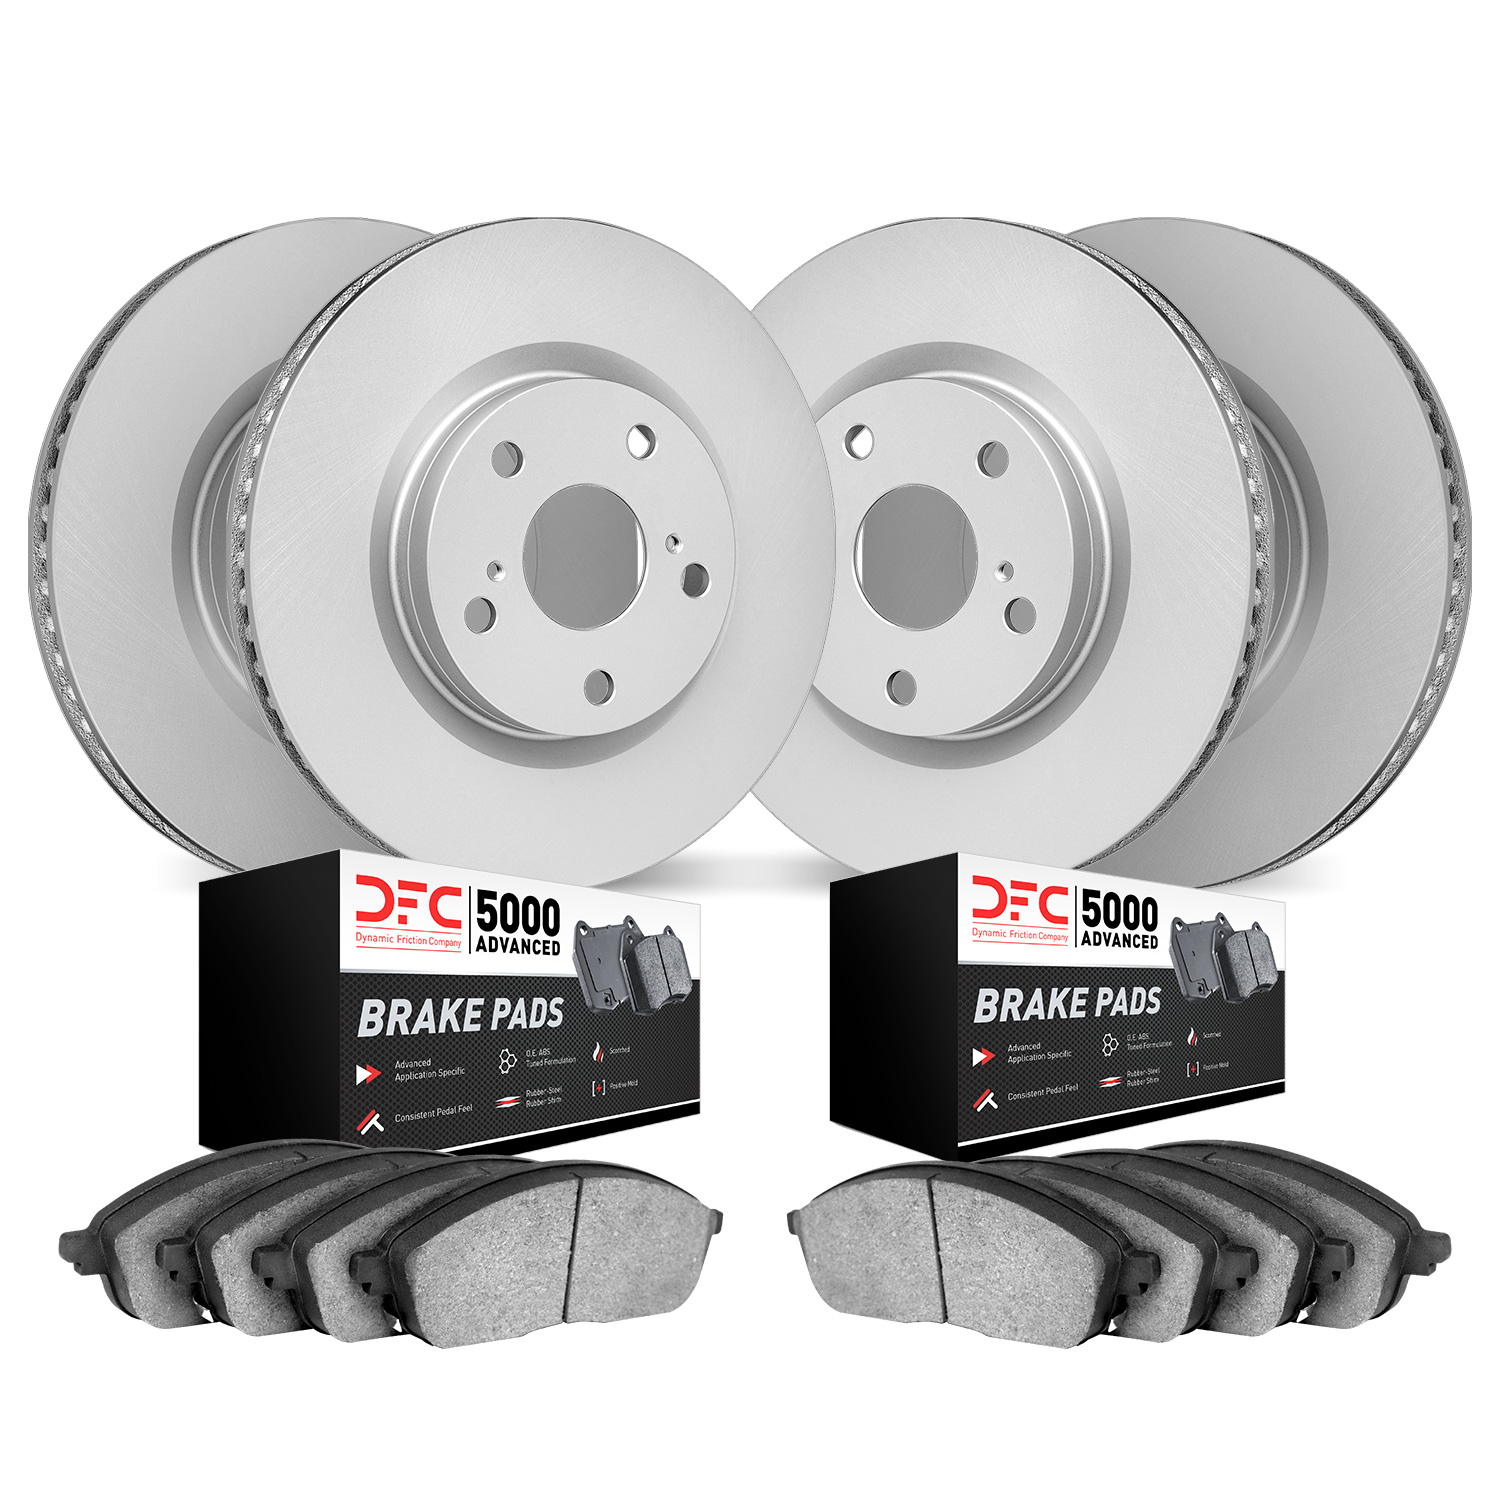 4504-63055 Geospec Brake Rotors w/5000 Advanced Brake Pads Kit, 2010-2015 Mercedes-Benz, Position: Front and Rear